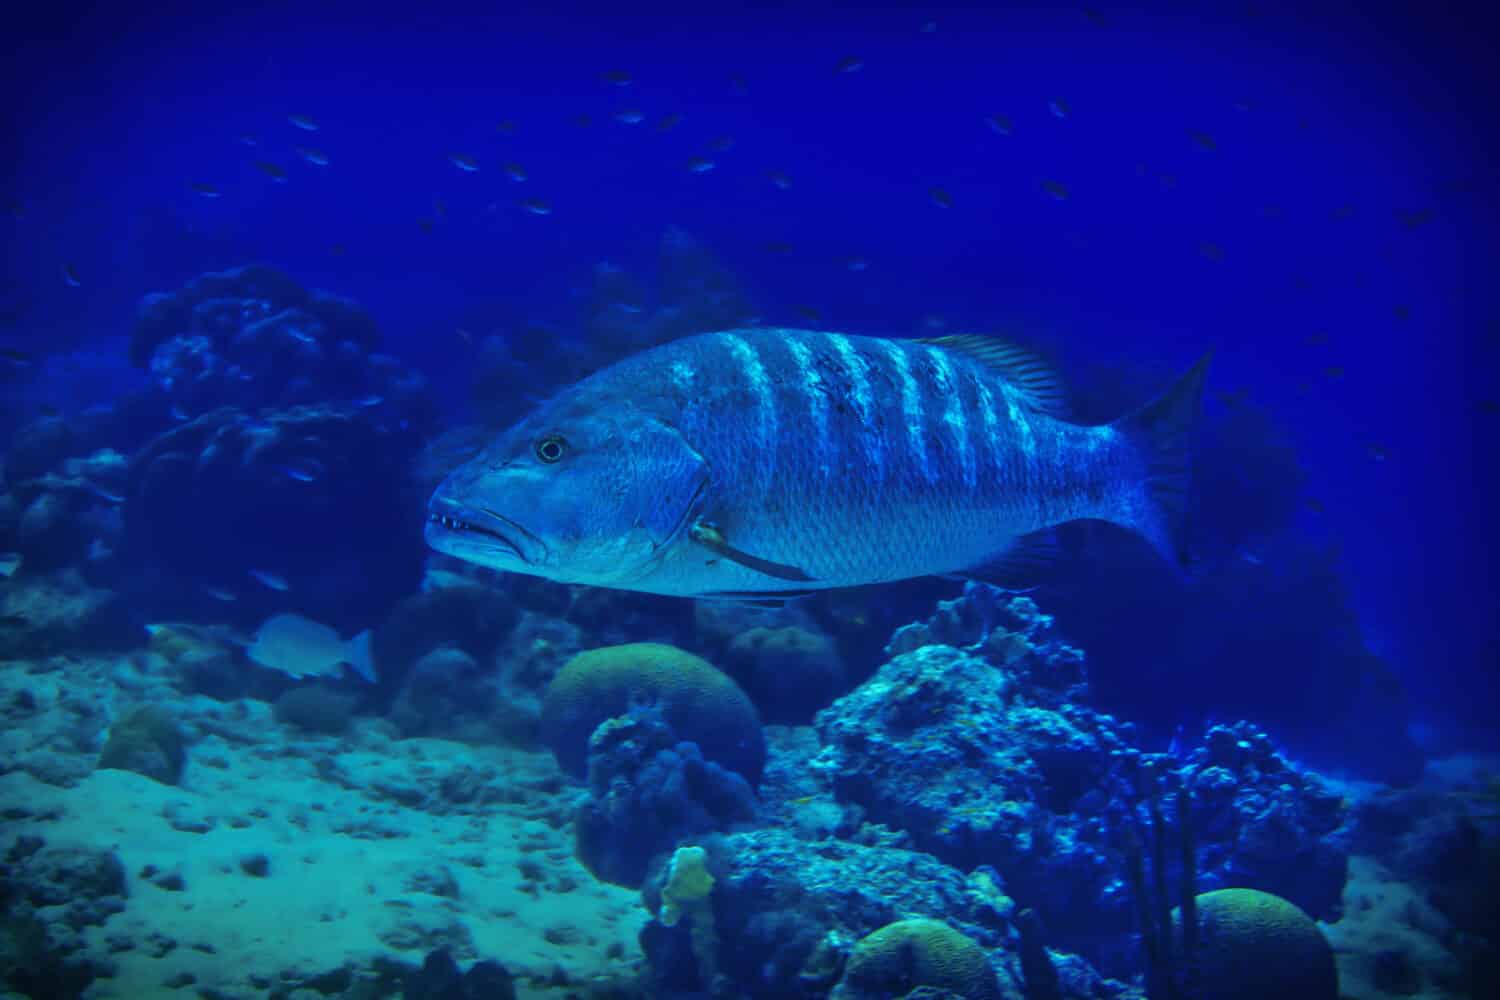 Cubera snapper fish swimming along the reef in Bonaire at dusk.